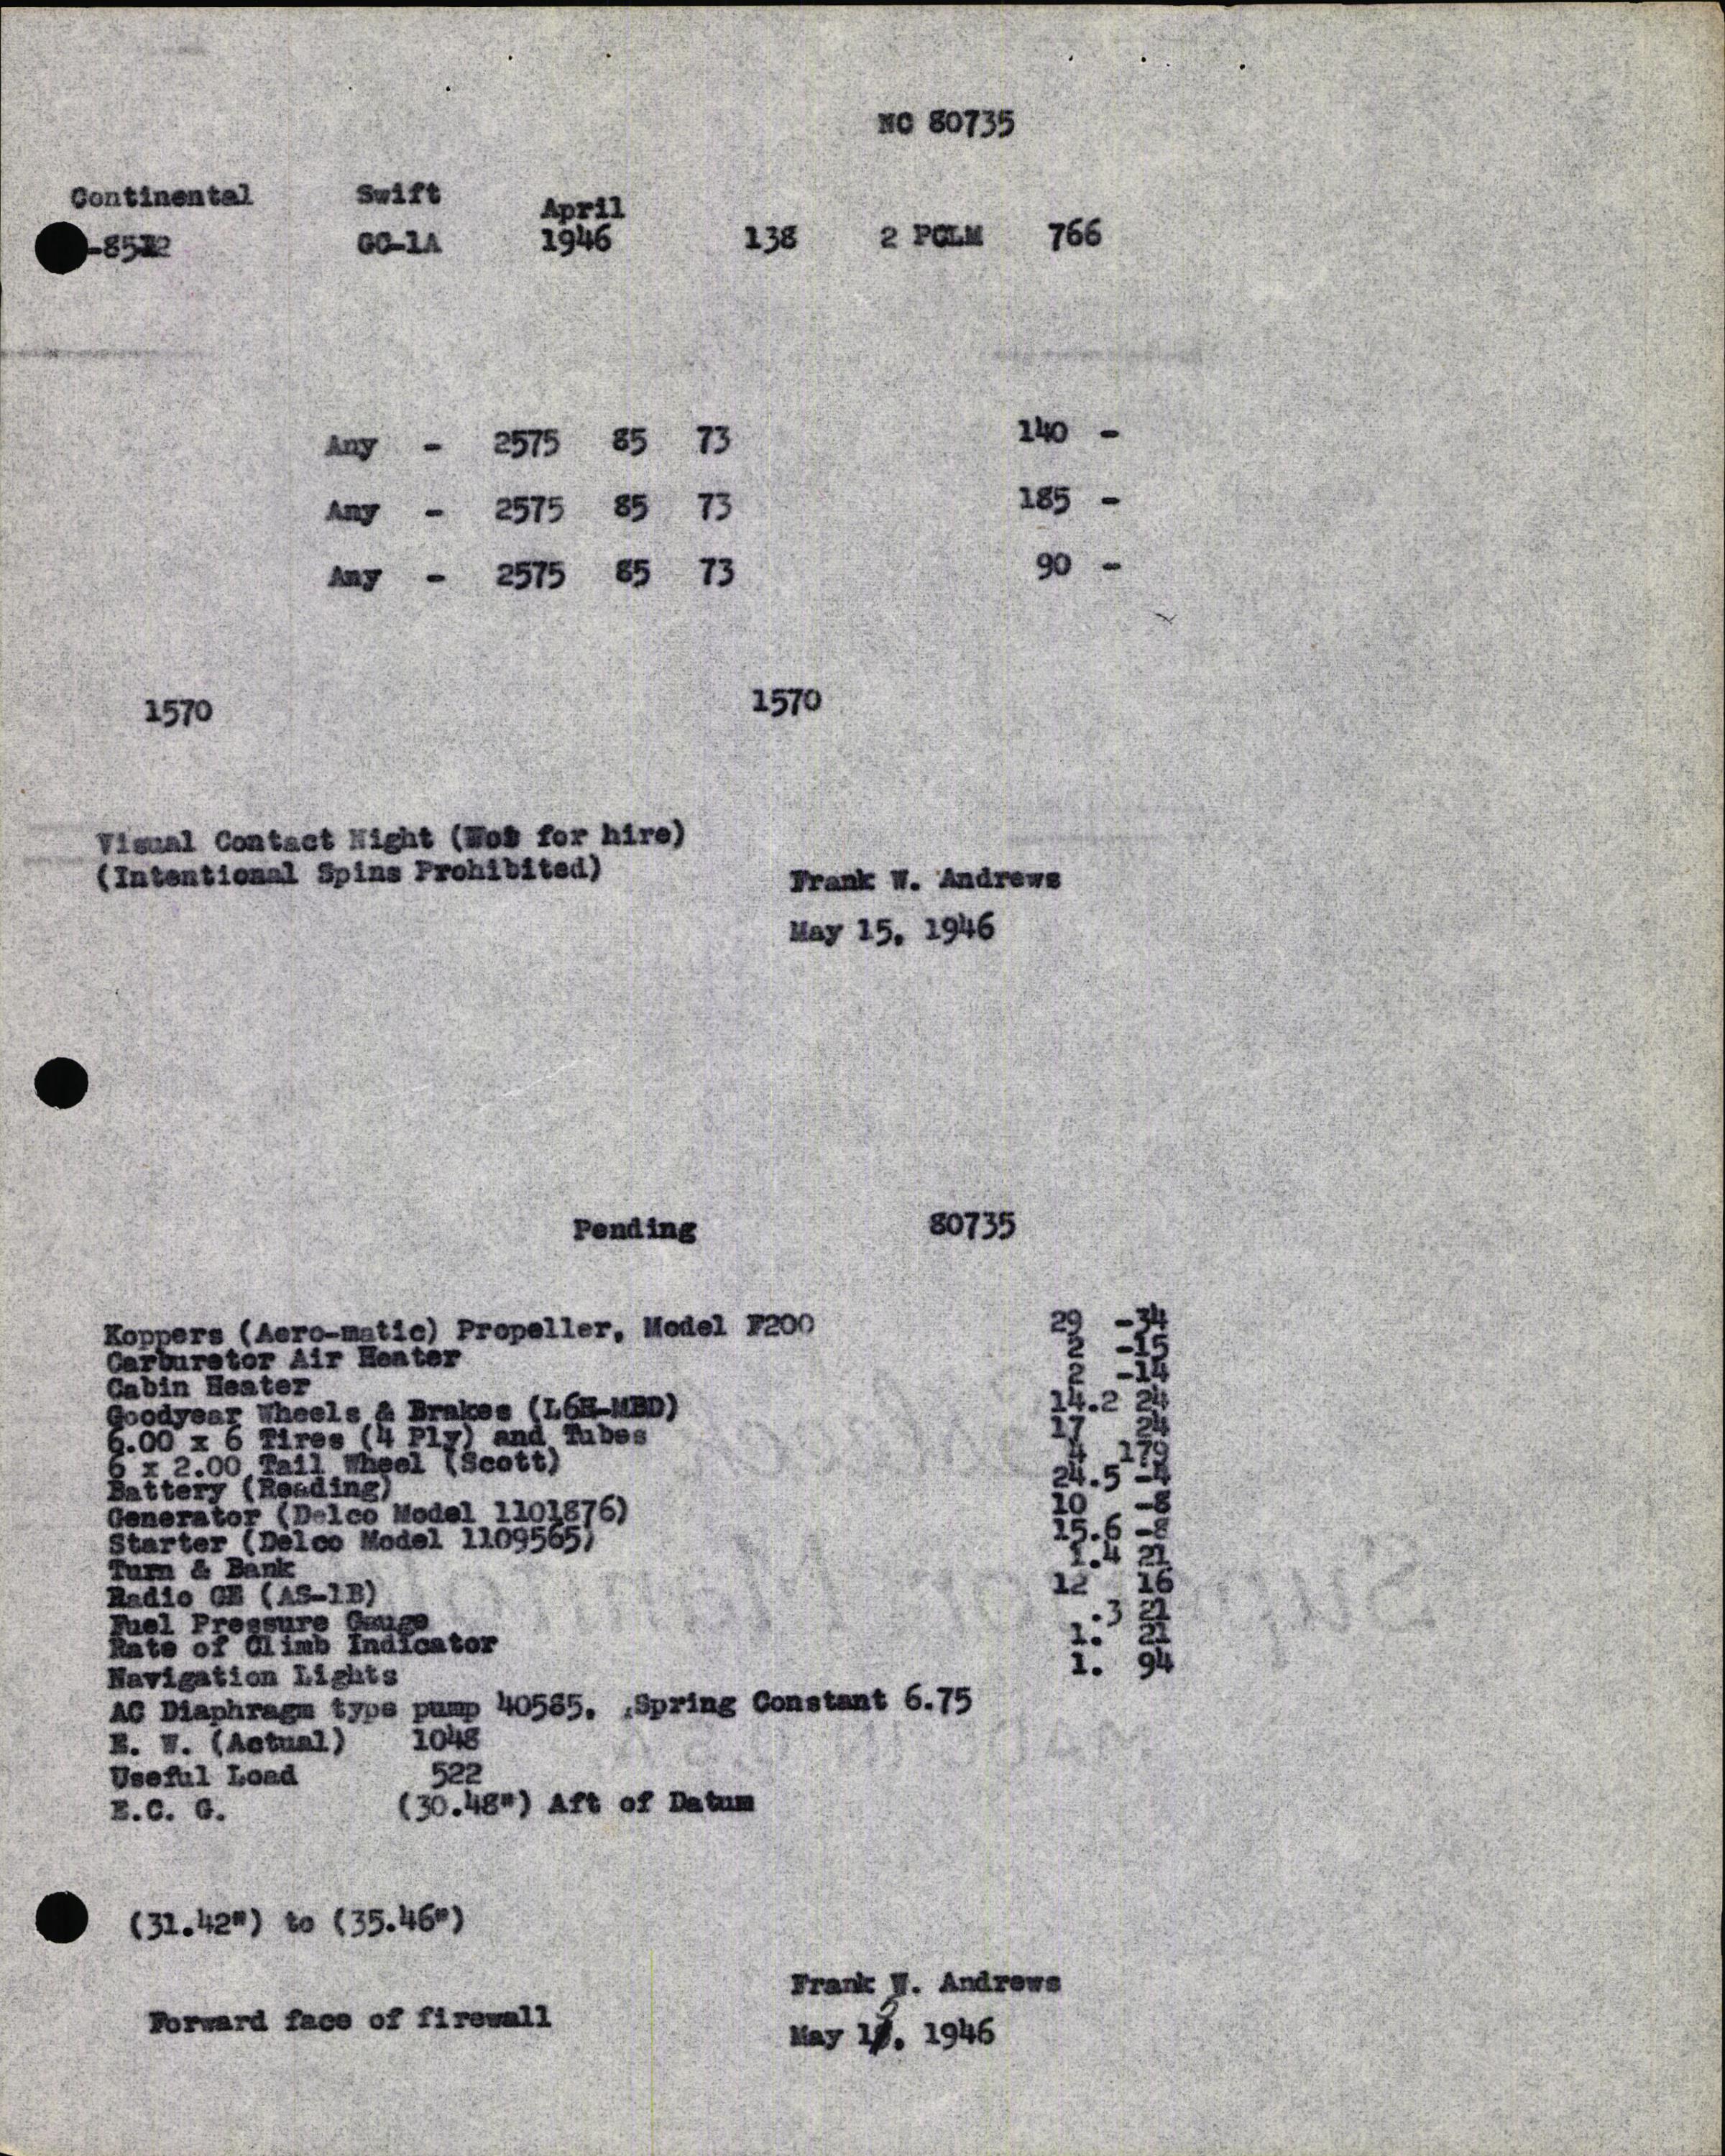 Sample page 7 from AirCorps Library document: Technical Information for Serial Number 138